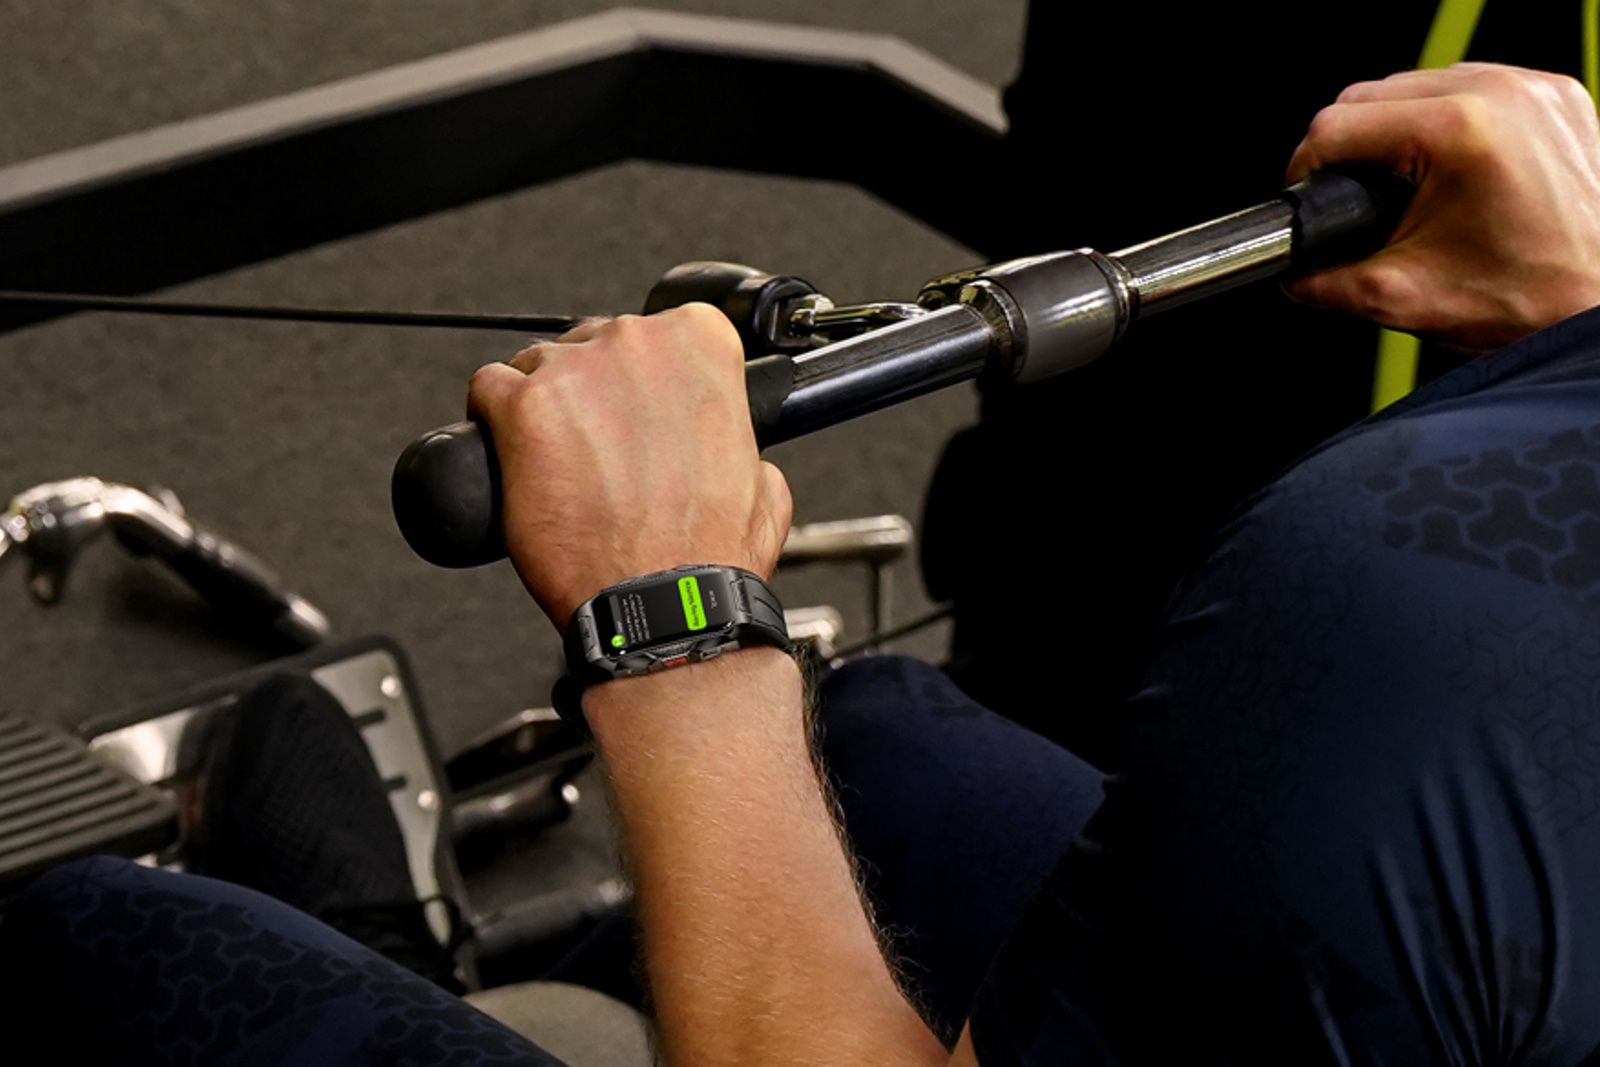 A man uses the rowing machine while wearing the Kospet Tank X1 smartwatch